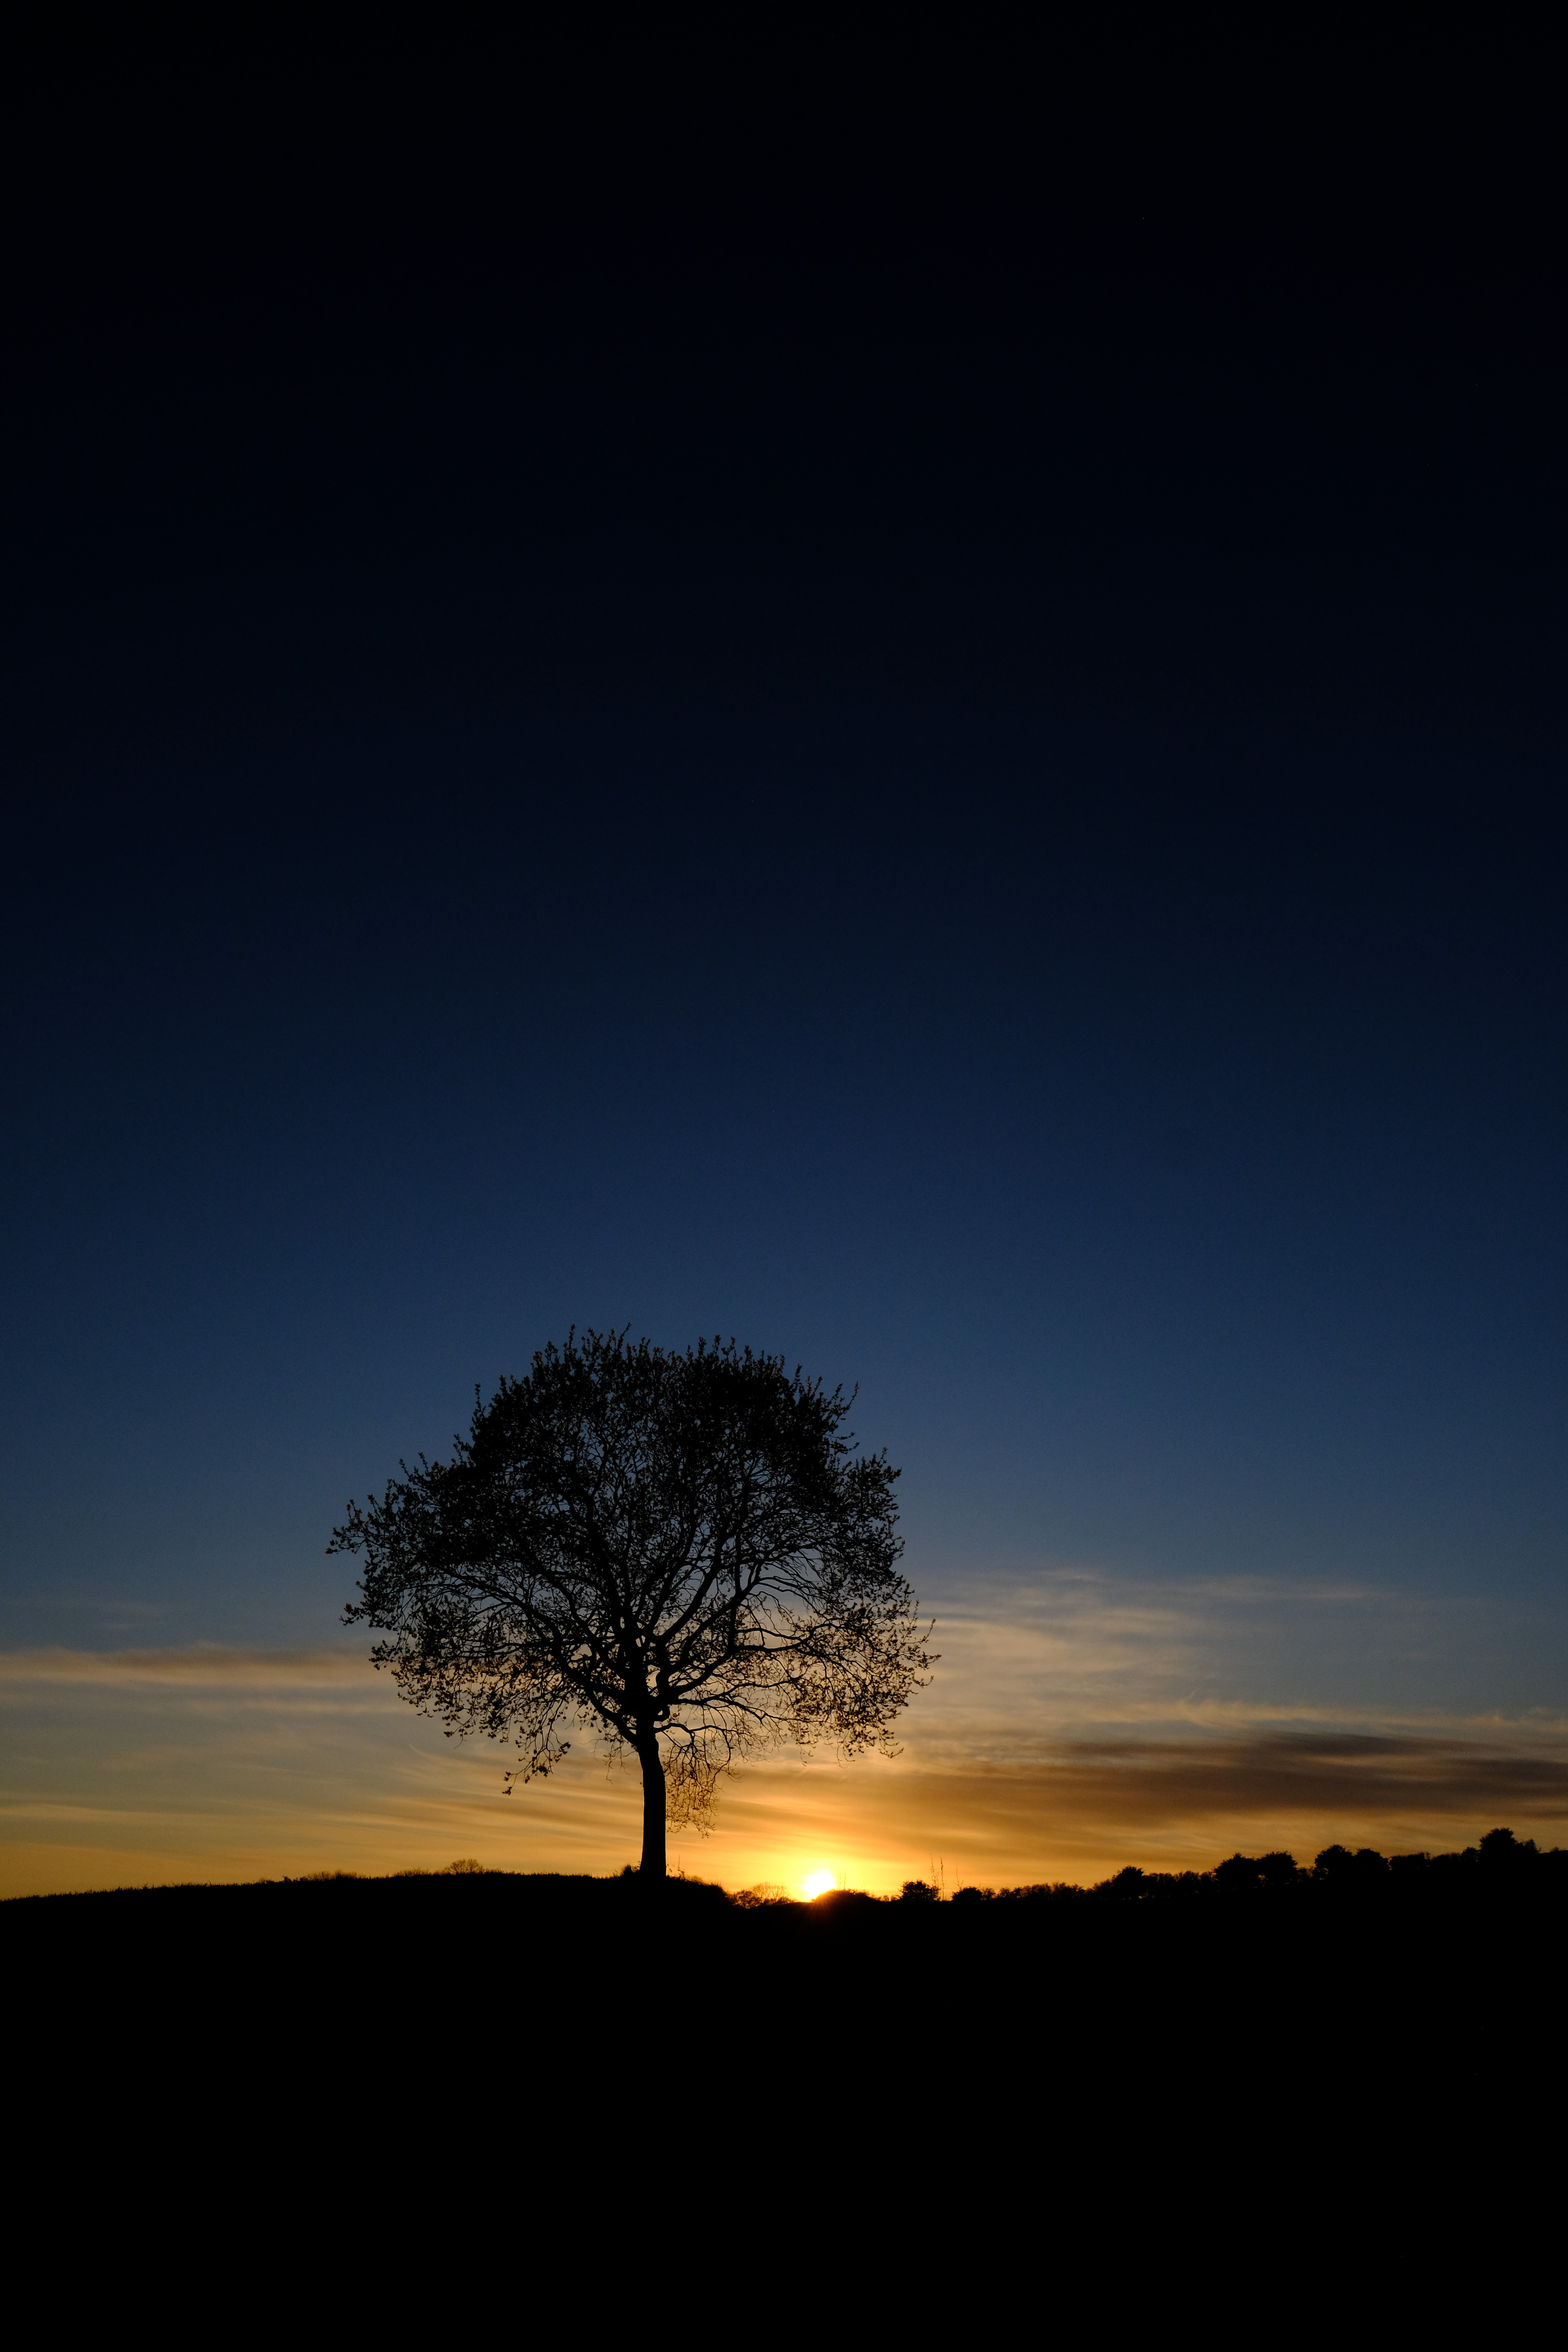 nature, tree, sunset, sky, silhouette, wood, branches High Definition image